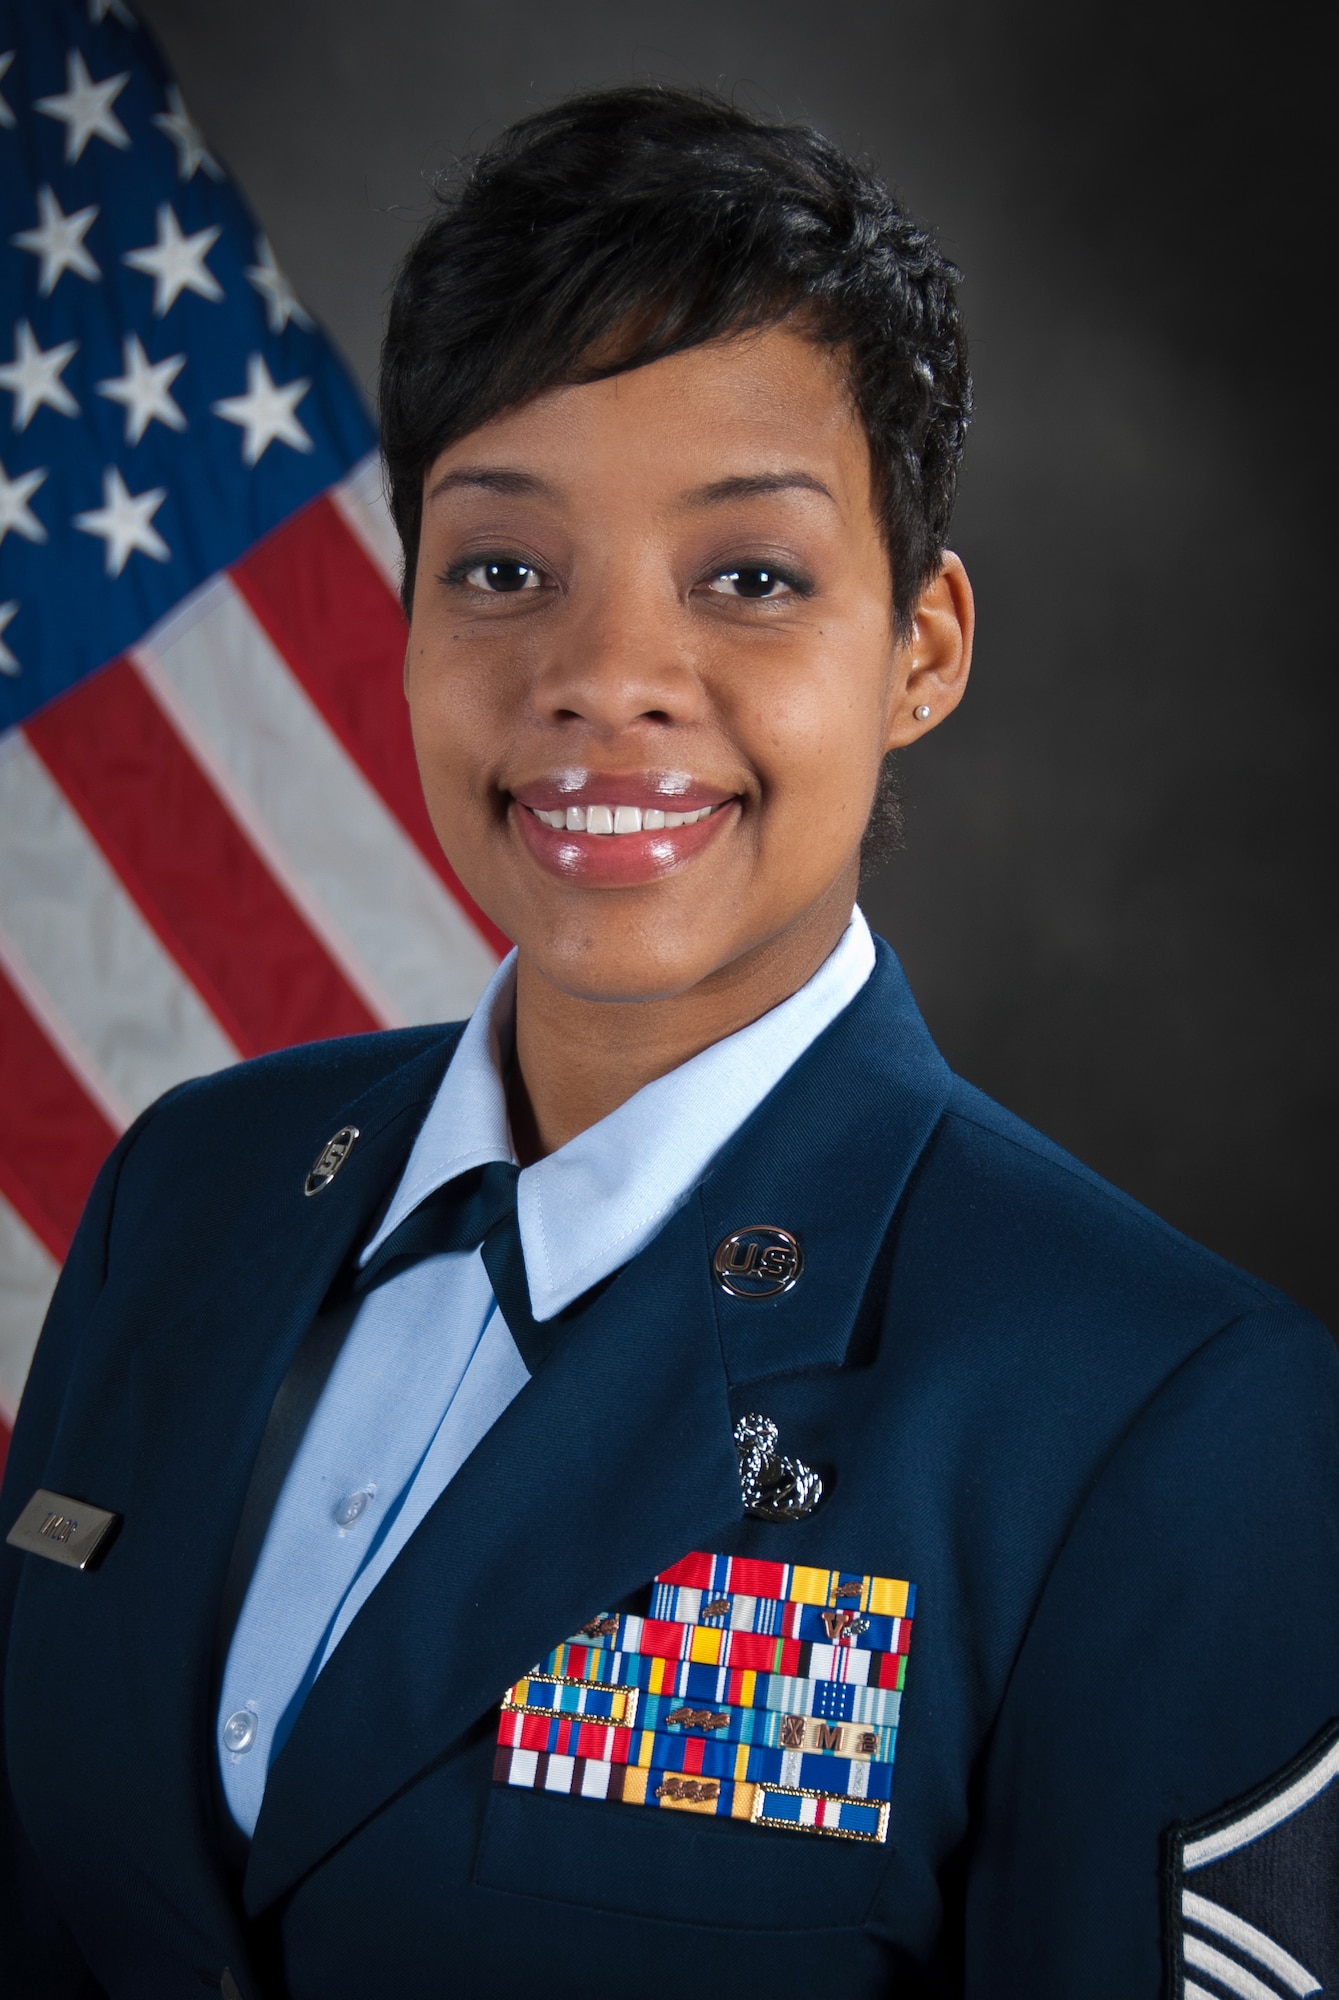 Master Sgt. Zakiya A. Taylor, the Kentucky Air National Guard’s Senior Non-Commissioned Officer of the Year for 2104, is a food service manager in the 123rd Force Support Squadron. During 2014, she served as an Army ROTC cadre leader in Burkina Faso, Africa, mentoring eight U.S. Army cadets while also teaching English and sharing cultural practices with Burkina Faso students at Namoano Georges Military Academy. (U.S. Air National Guard photo by Master Sgt. Philip Speck)